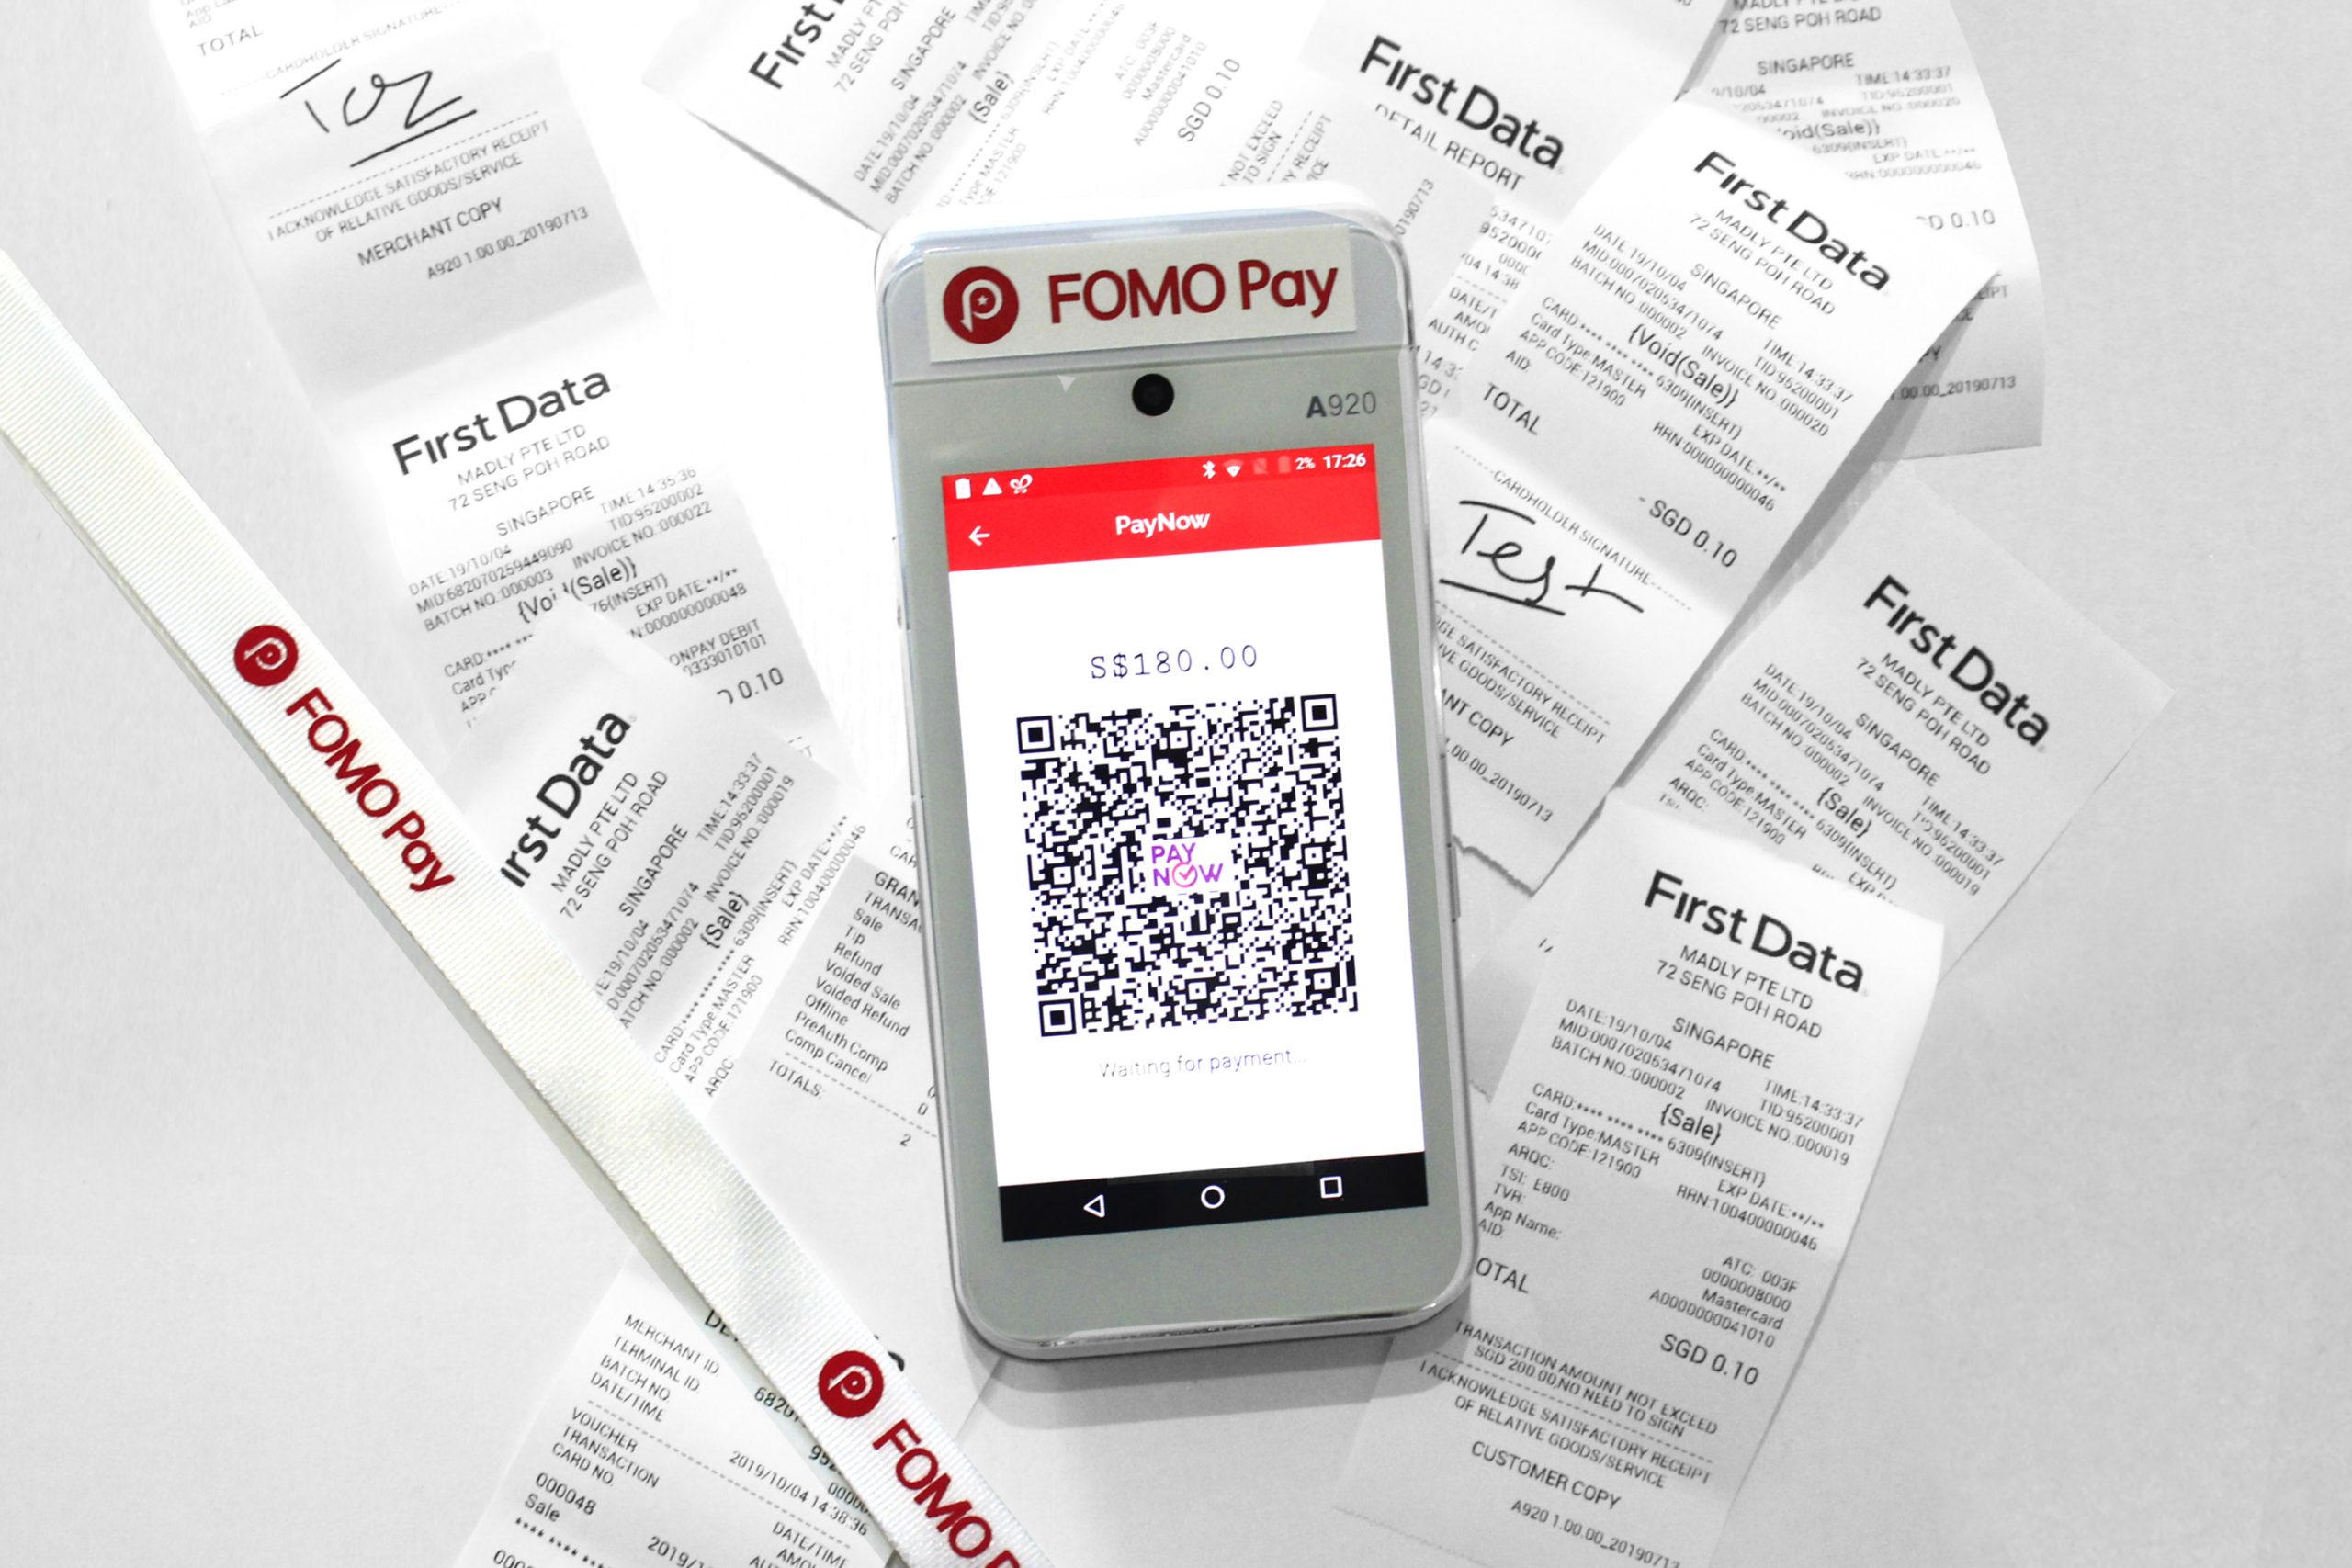 FOMO Pay Partners Fiserv to Provide QR Code Payment Solution to its Merchants